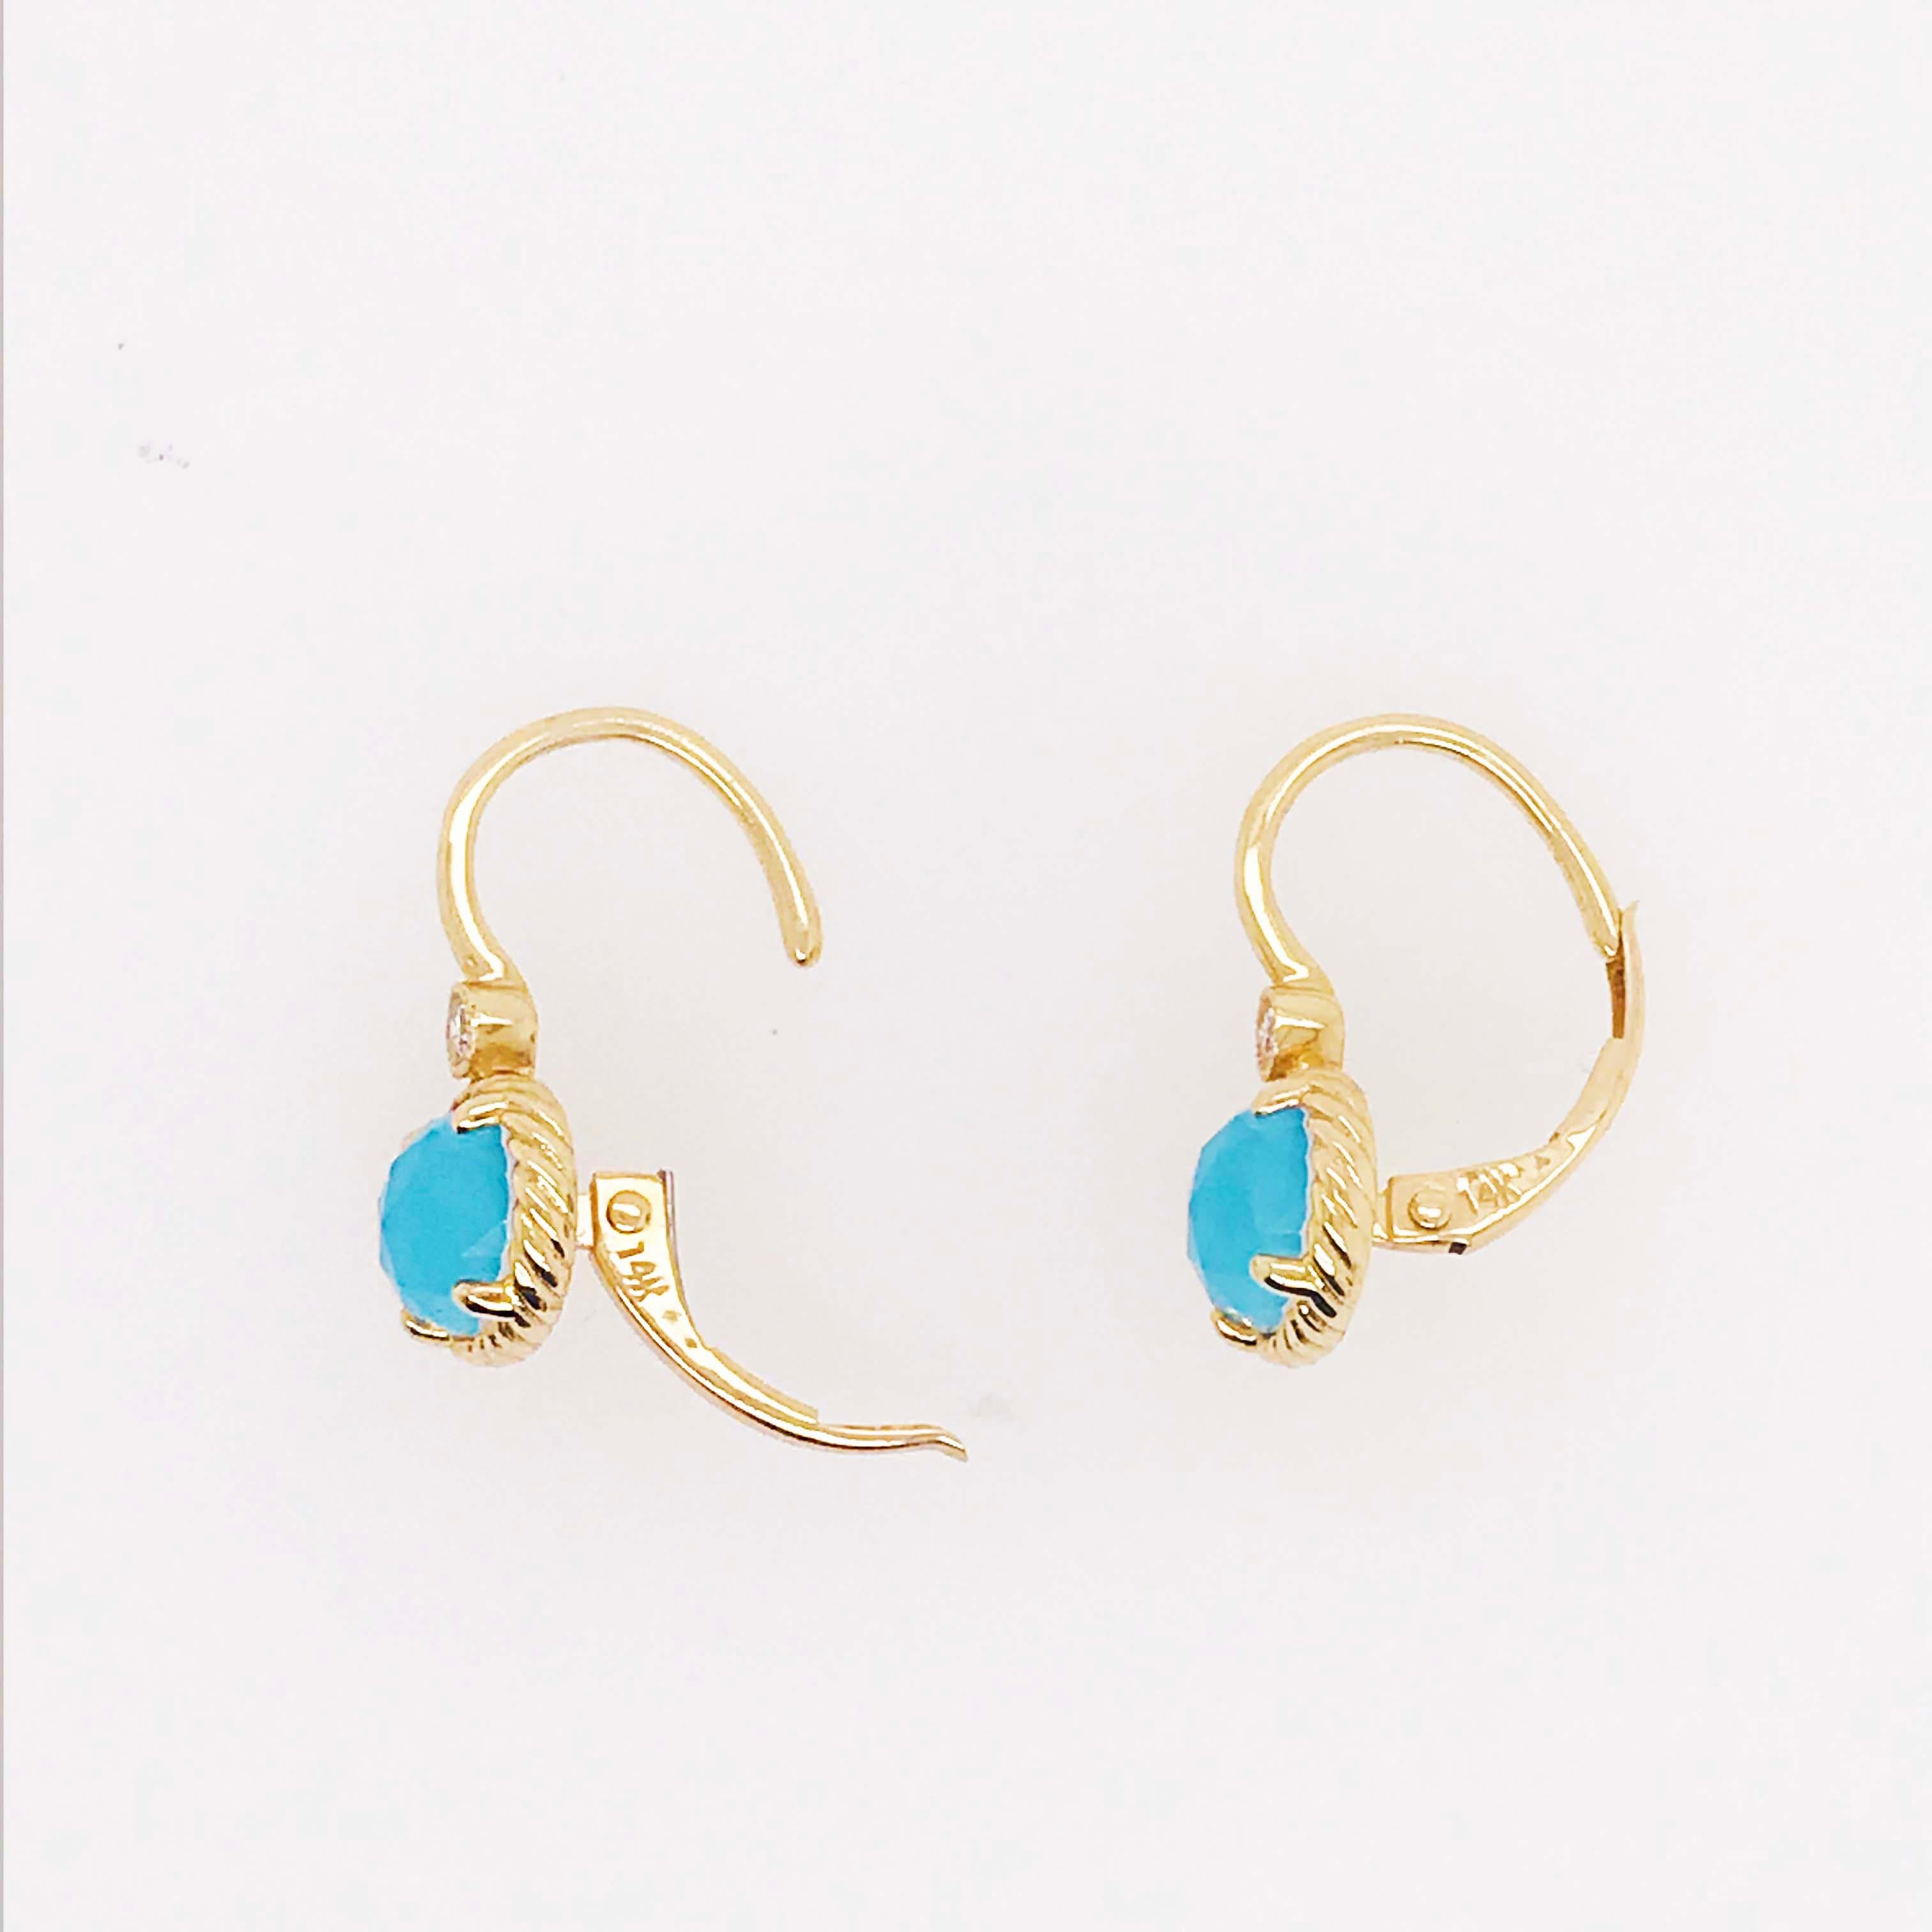 Oval Turquoise Rock Crystal & Diamond Earring Dangles in 14 Karat Gold Turquoise For Sale 3